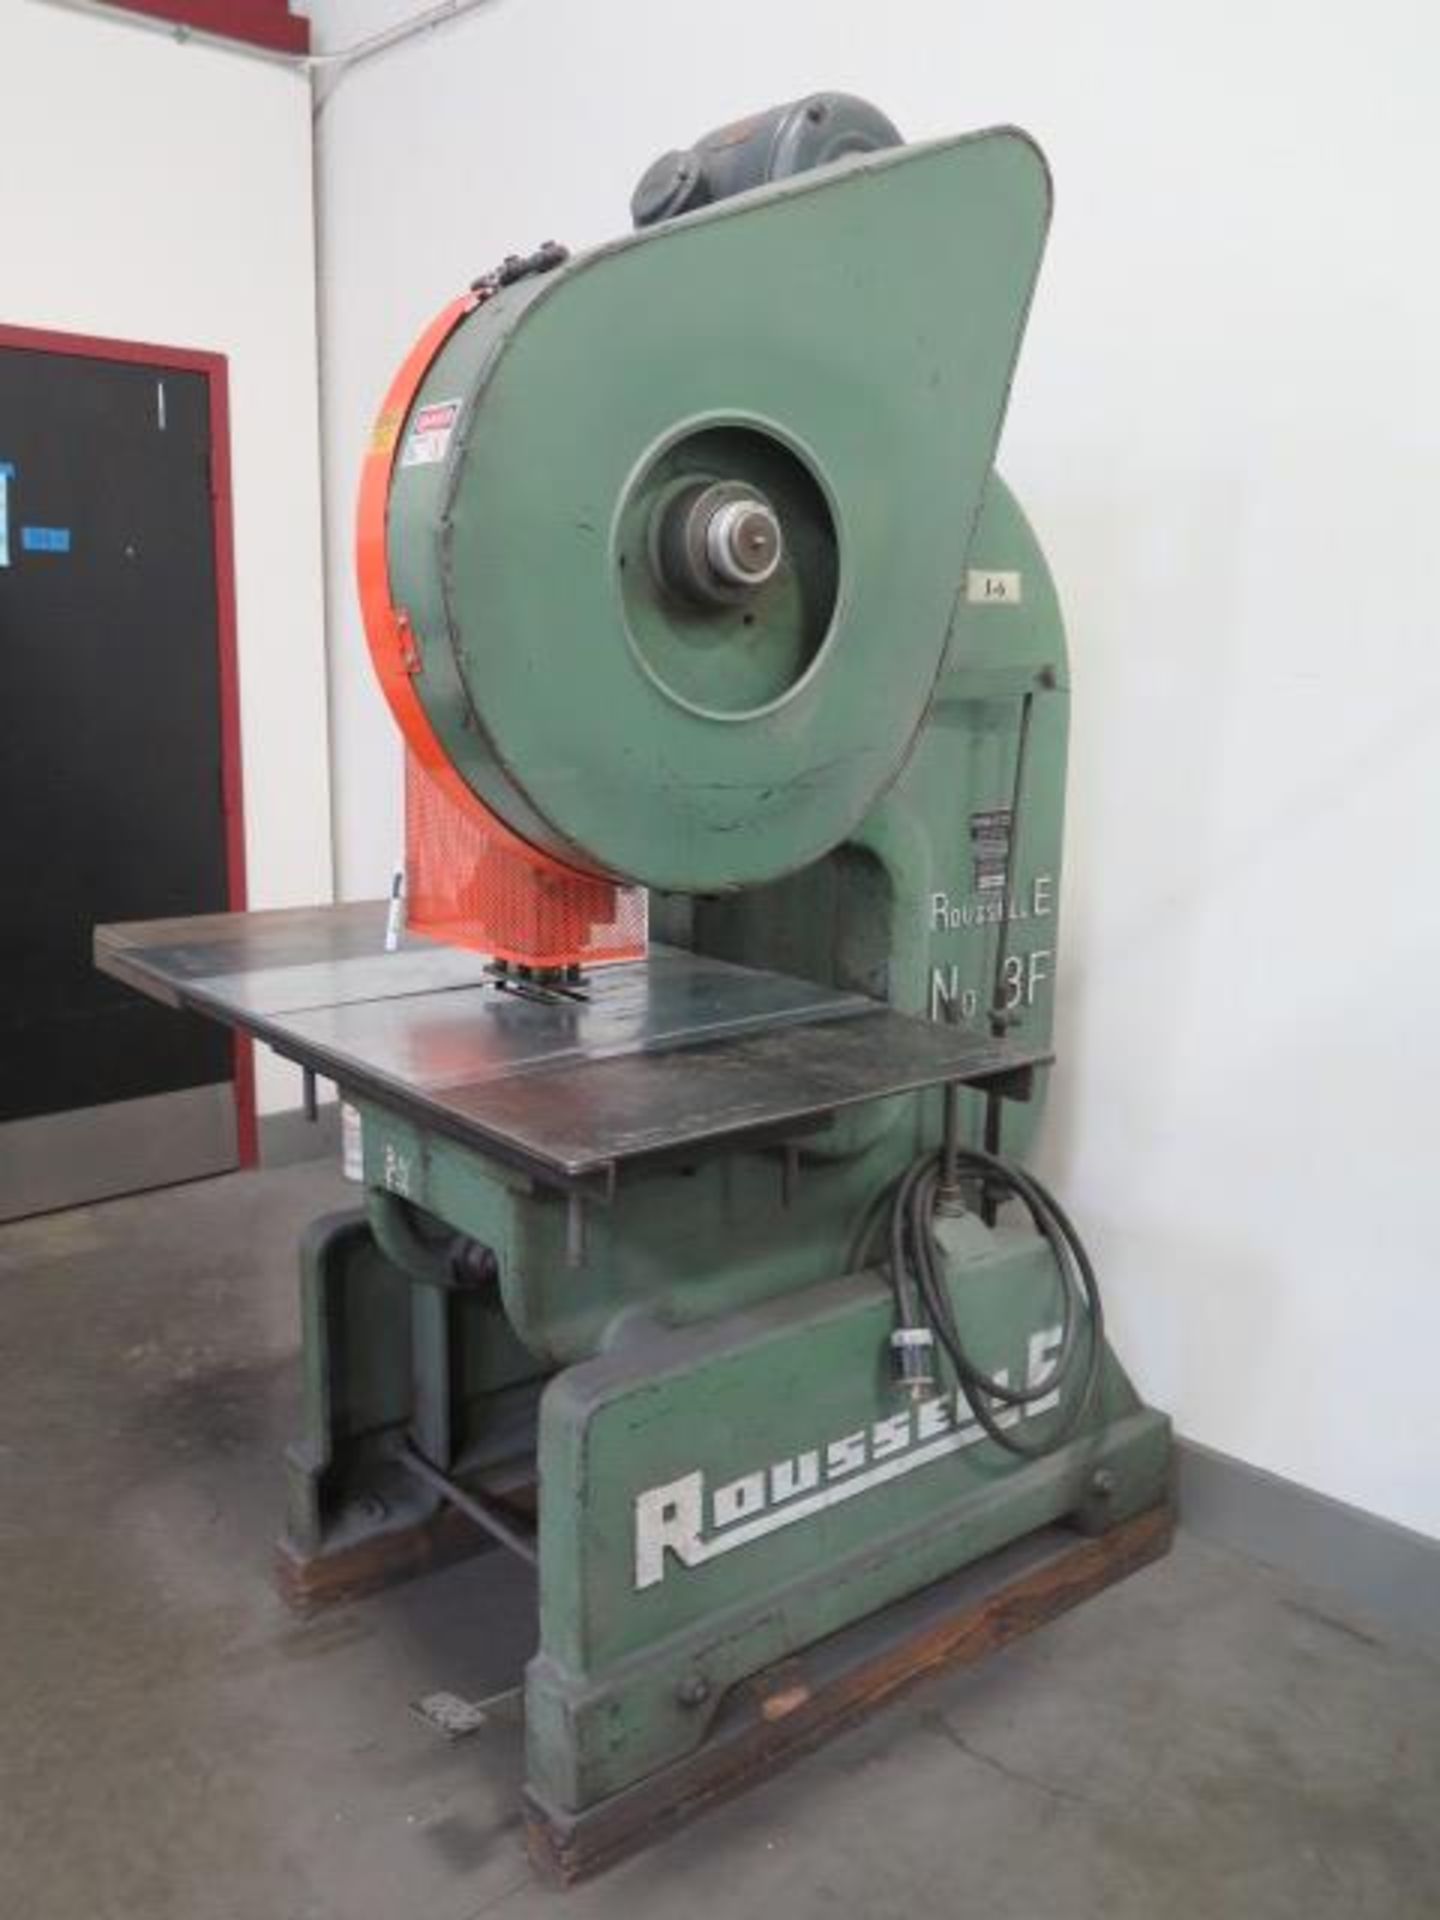 Rousselle No.3F 25 Ton OBI Stamping Press s/n DFS11976 w/ 125 Strokes/Min, 14” x 20” Bolster Area - Image 3 of 9